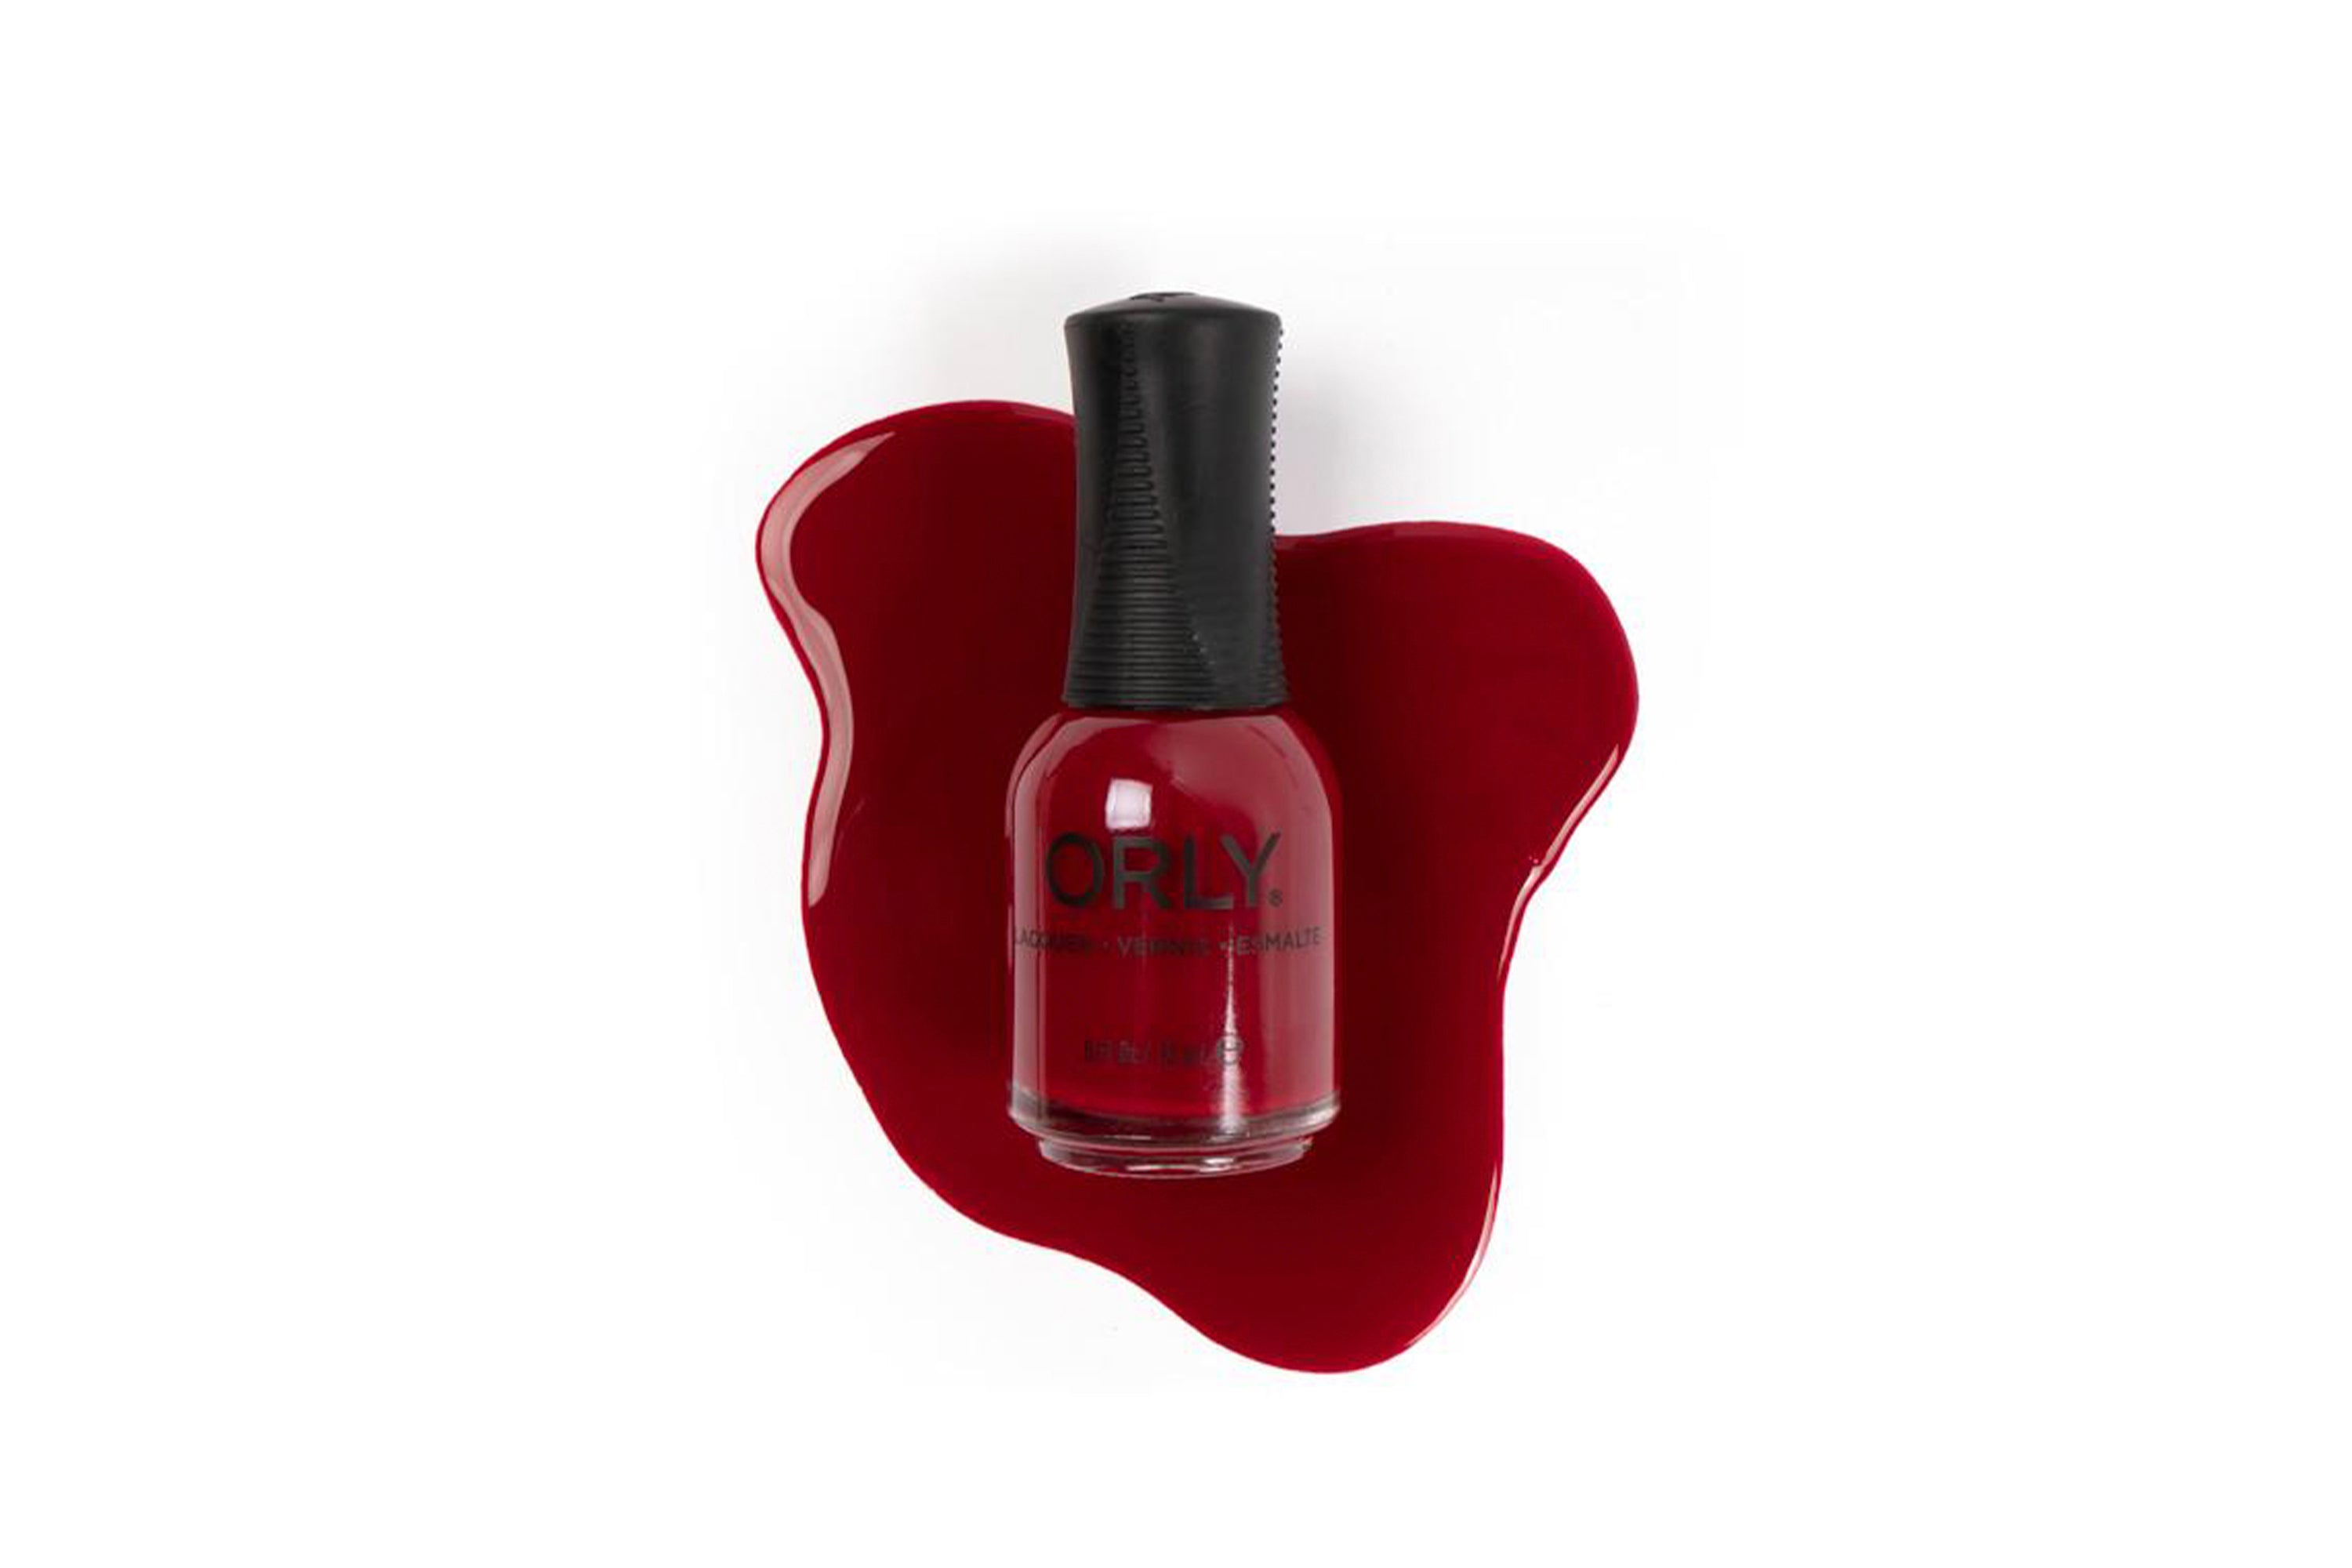 EFC X Orly Nail Polish in Time For Wine